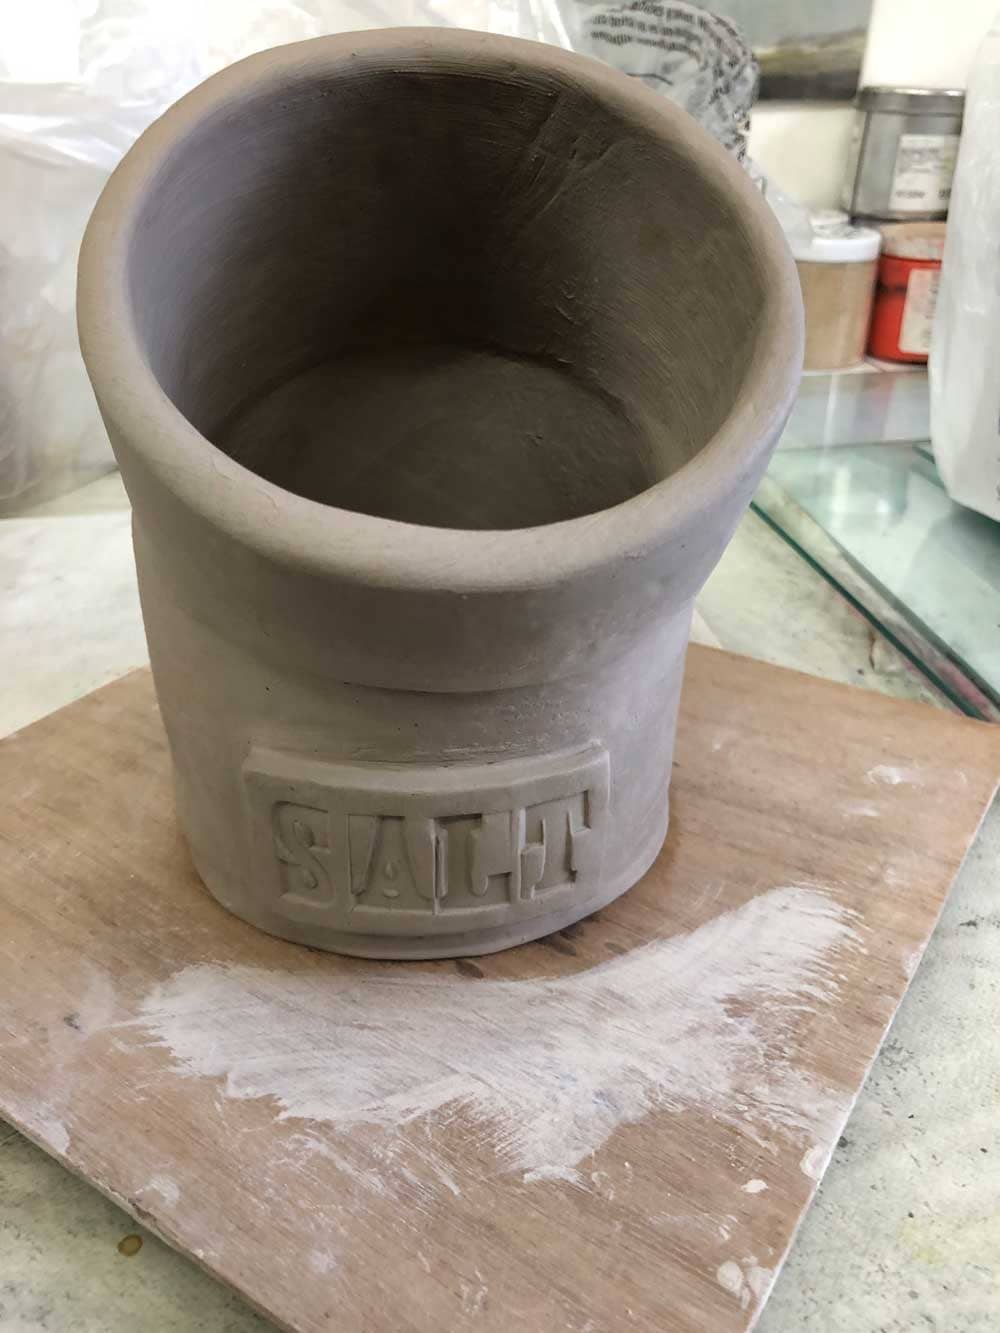 A salt-pig, currently unfired, so grey/brown in colour, with a little name-plate reading "SALT" at the base. It's made up of one cylinders, cut at an angle of about 30 degrees into two, one is rotated and then they're both re-joined.